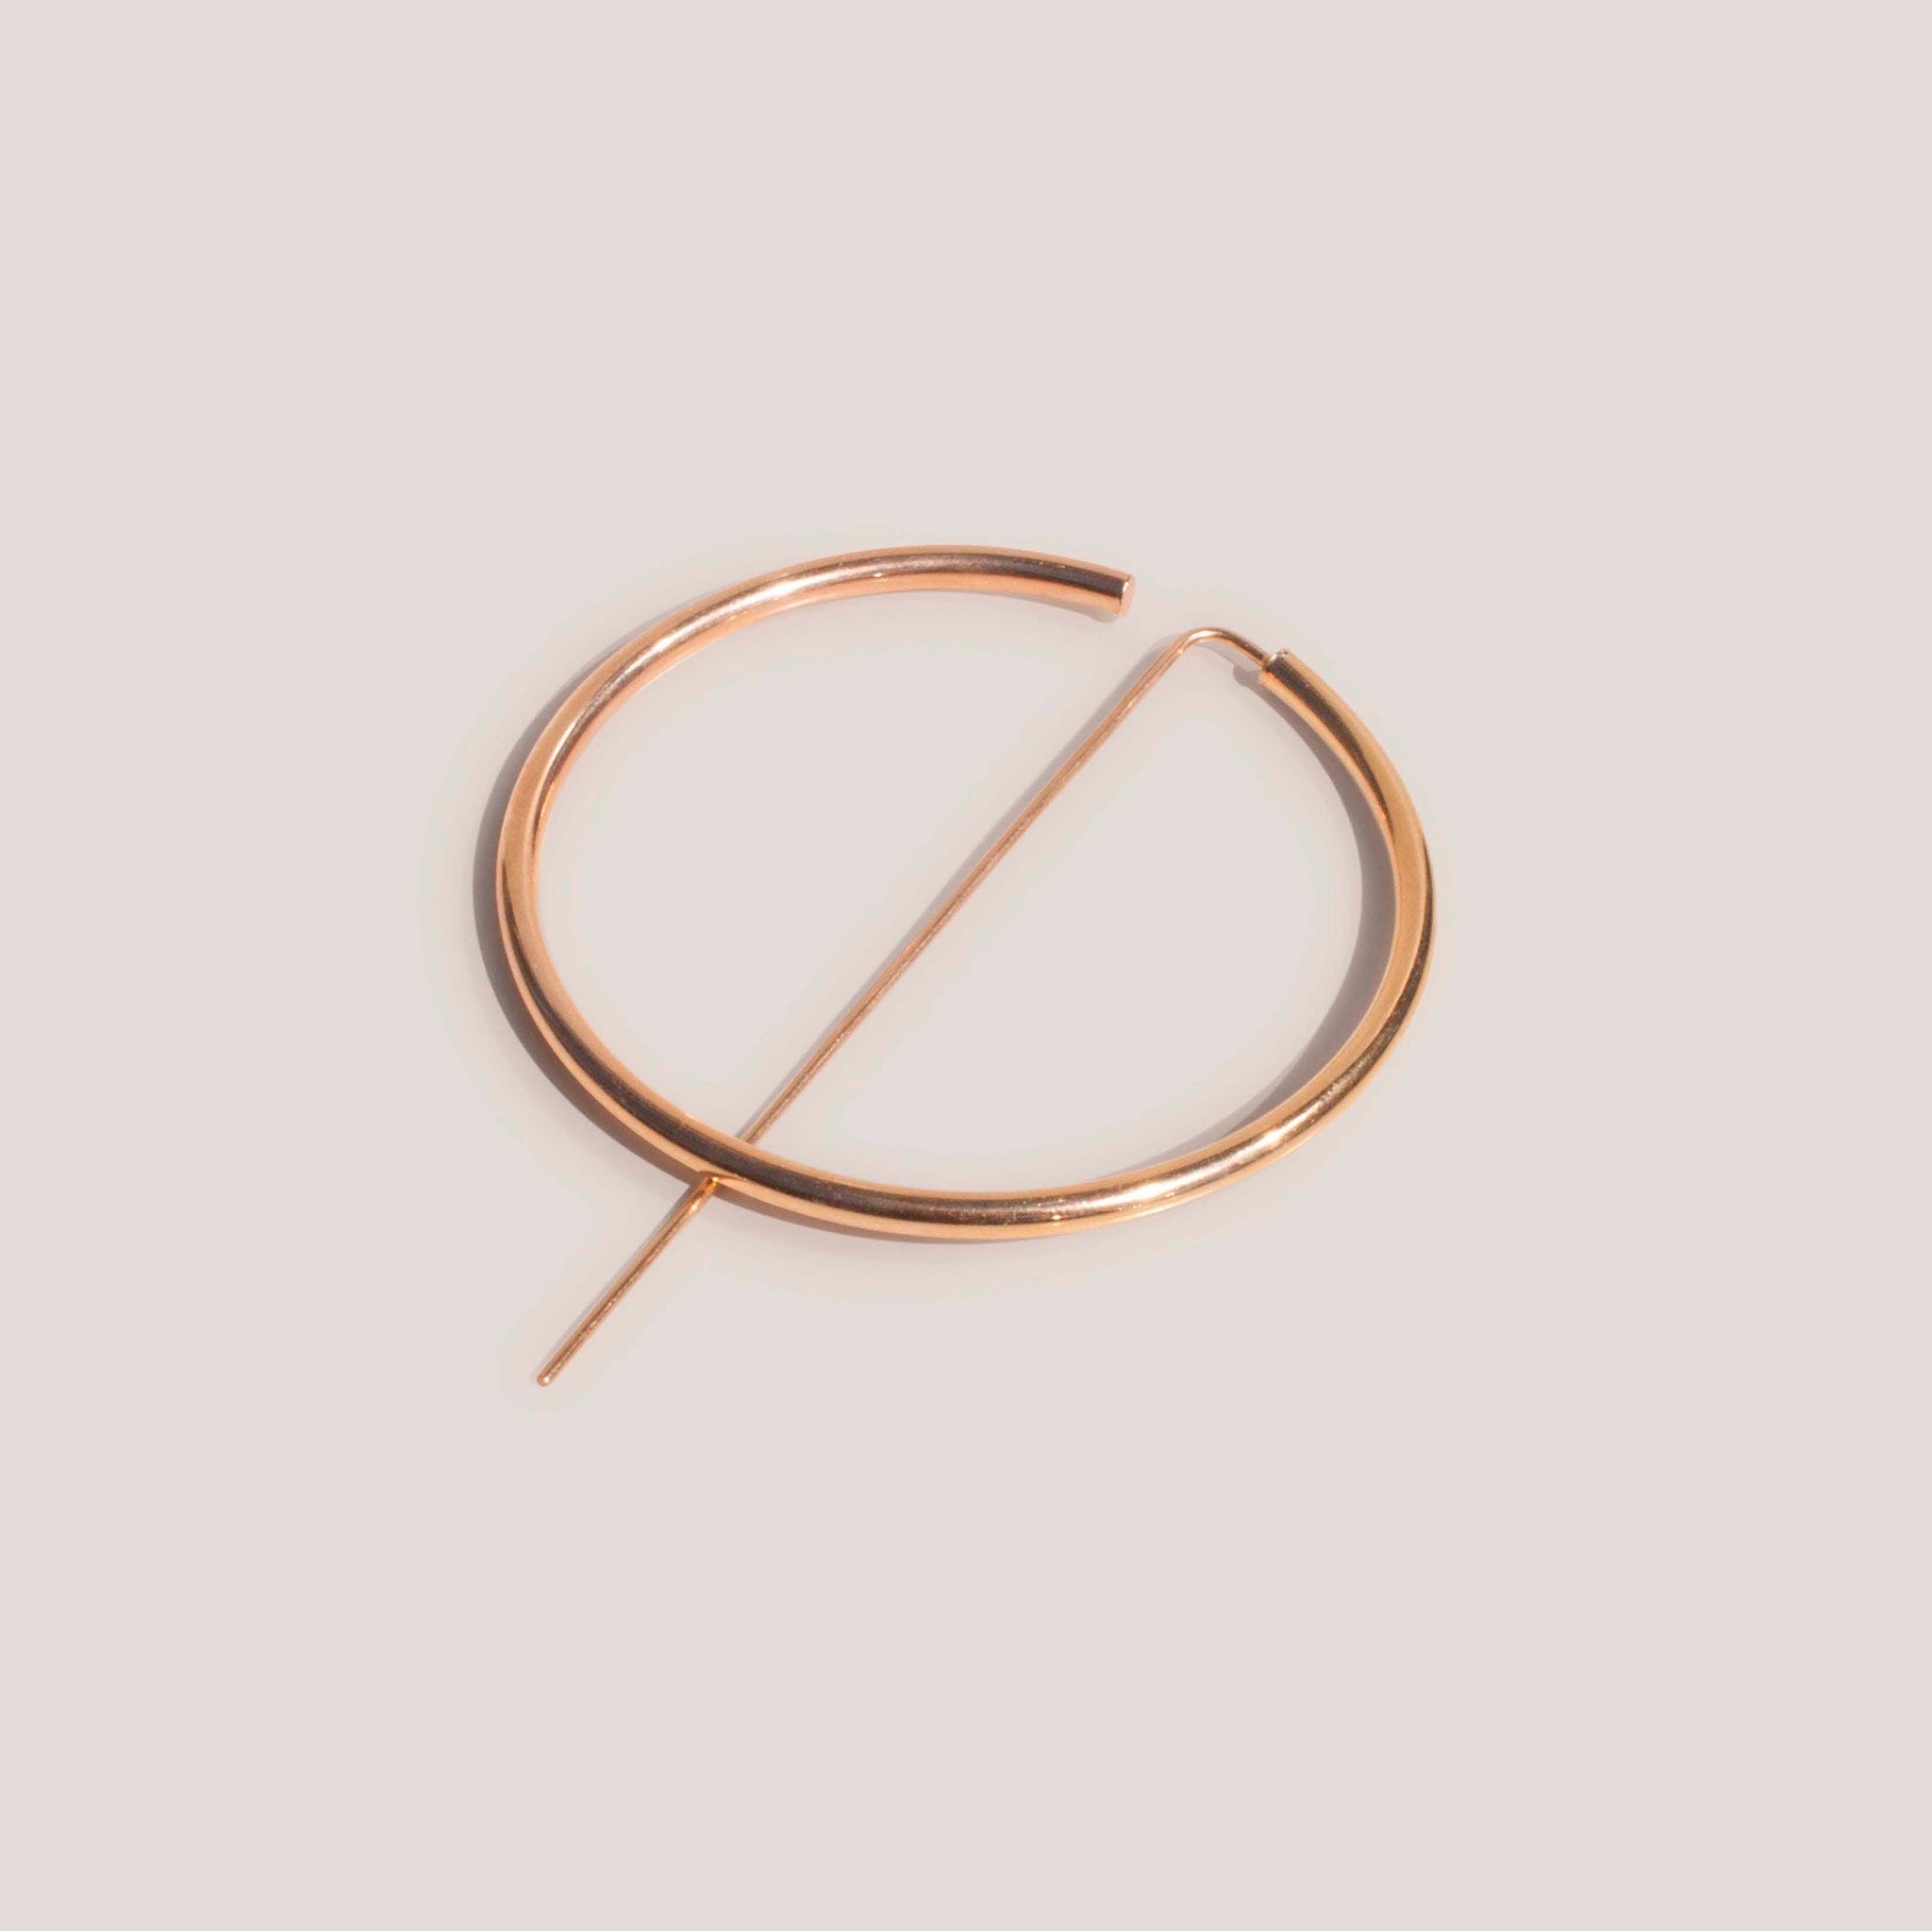 Jaclyn Moran - Oversized Hoop & Post Earrings in Rose Gold, available at LCD.